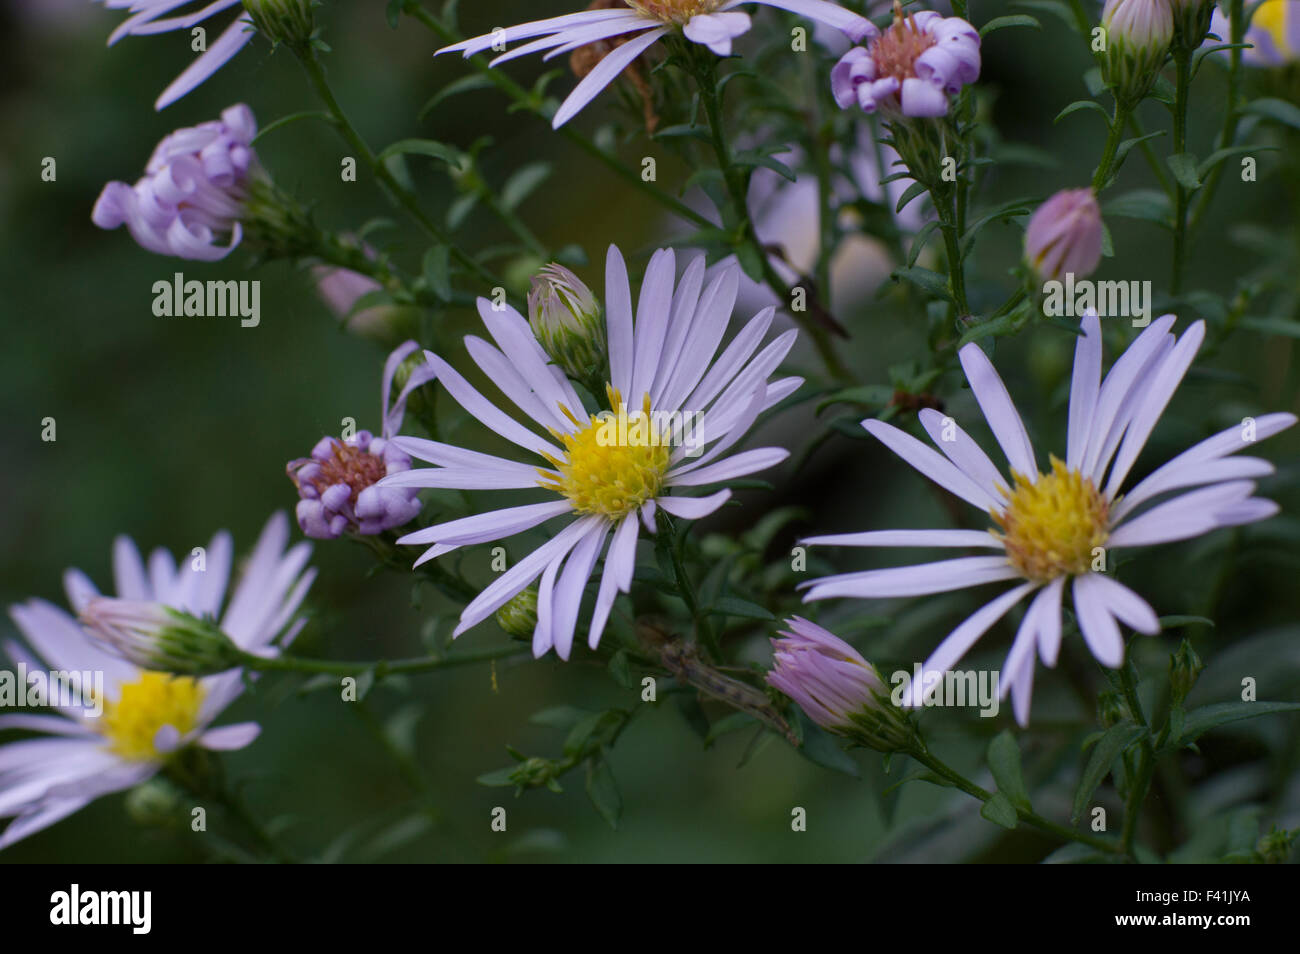 King George Michaelmas Daisy is an older variety of perennial aster, and one of the best with its prolific, early, long-lasting show of violet Stock Photo